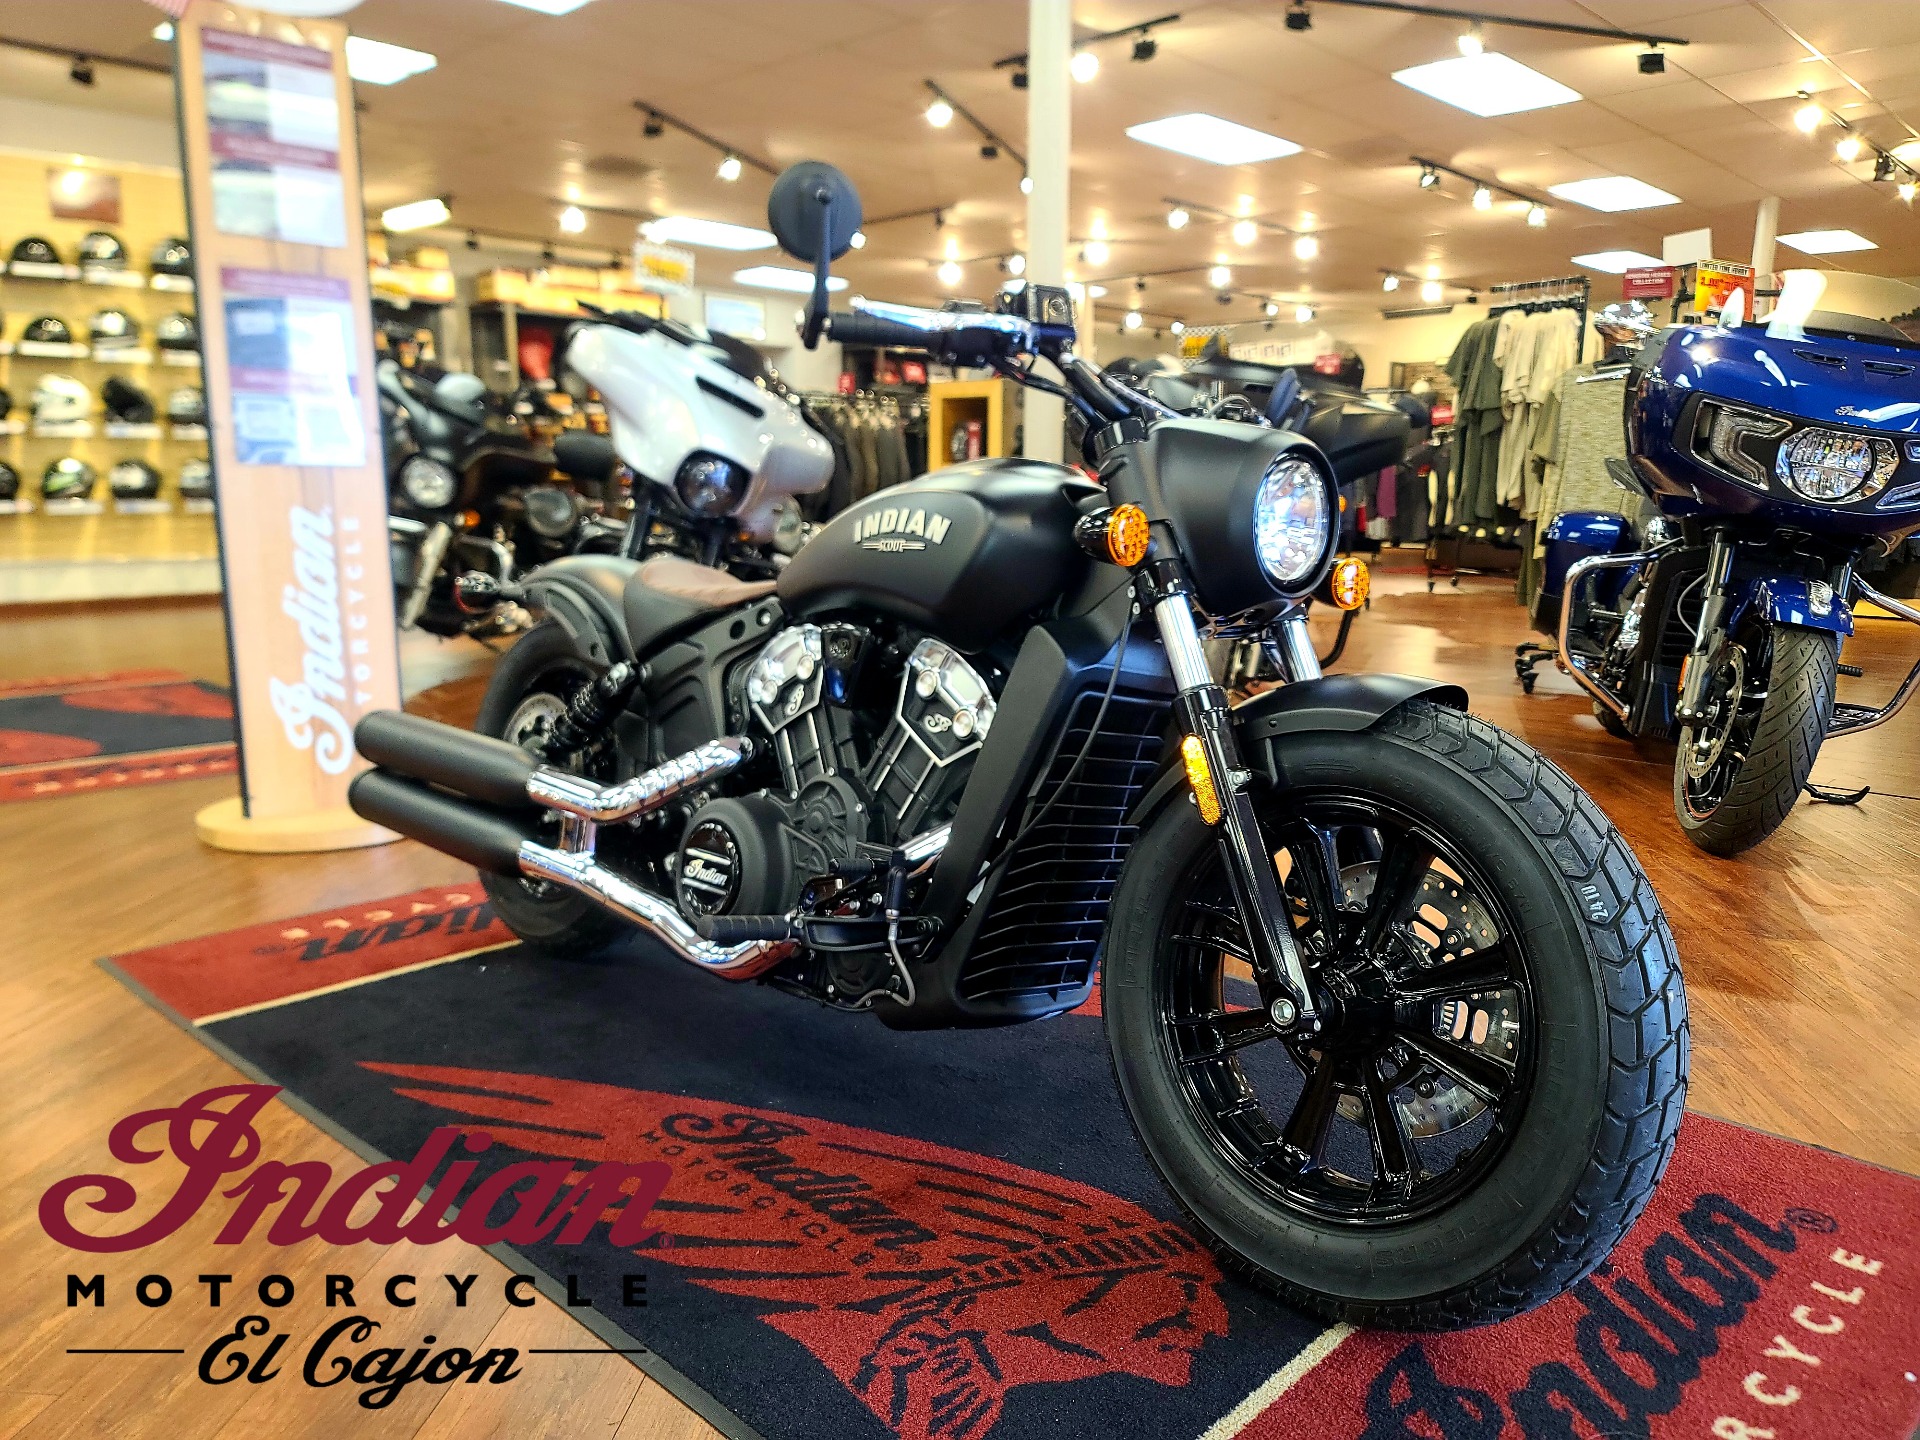 2021 Indian Scout® Bobber ABS in EL Cajon, California - Photo 1